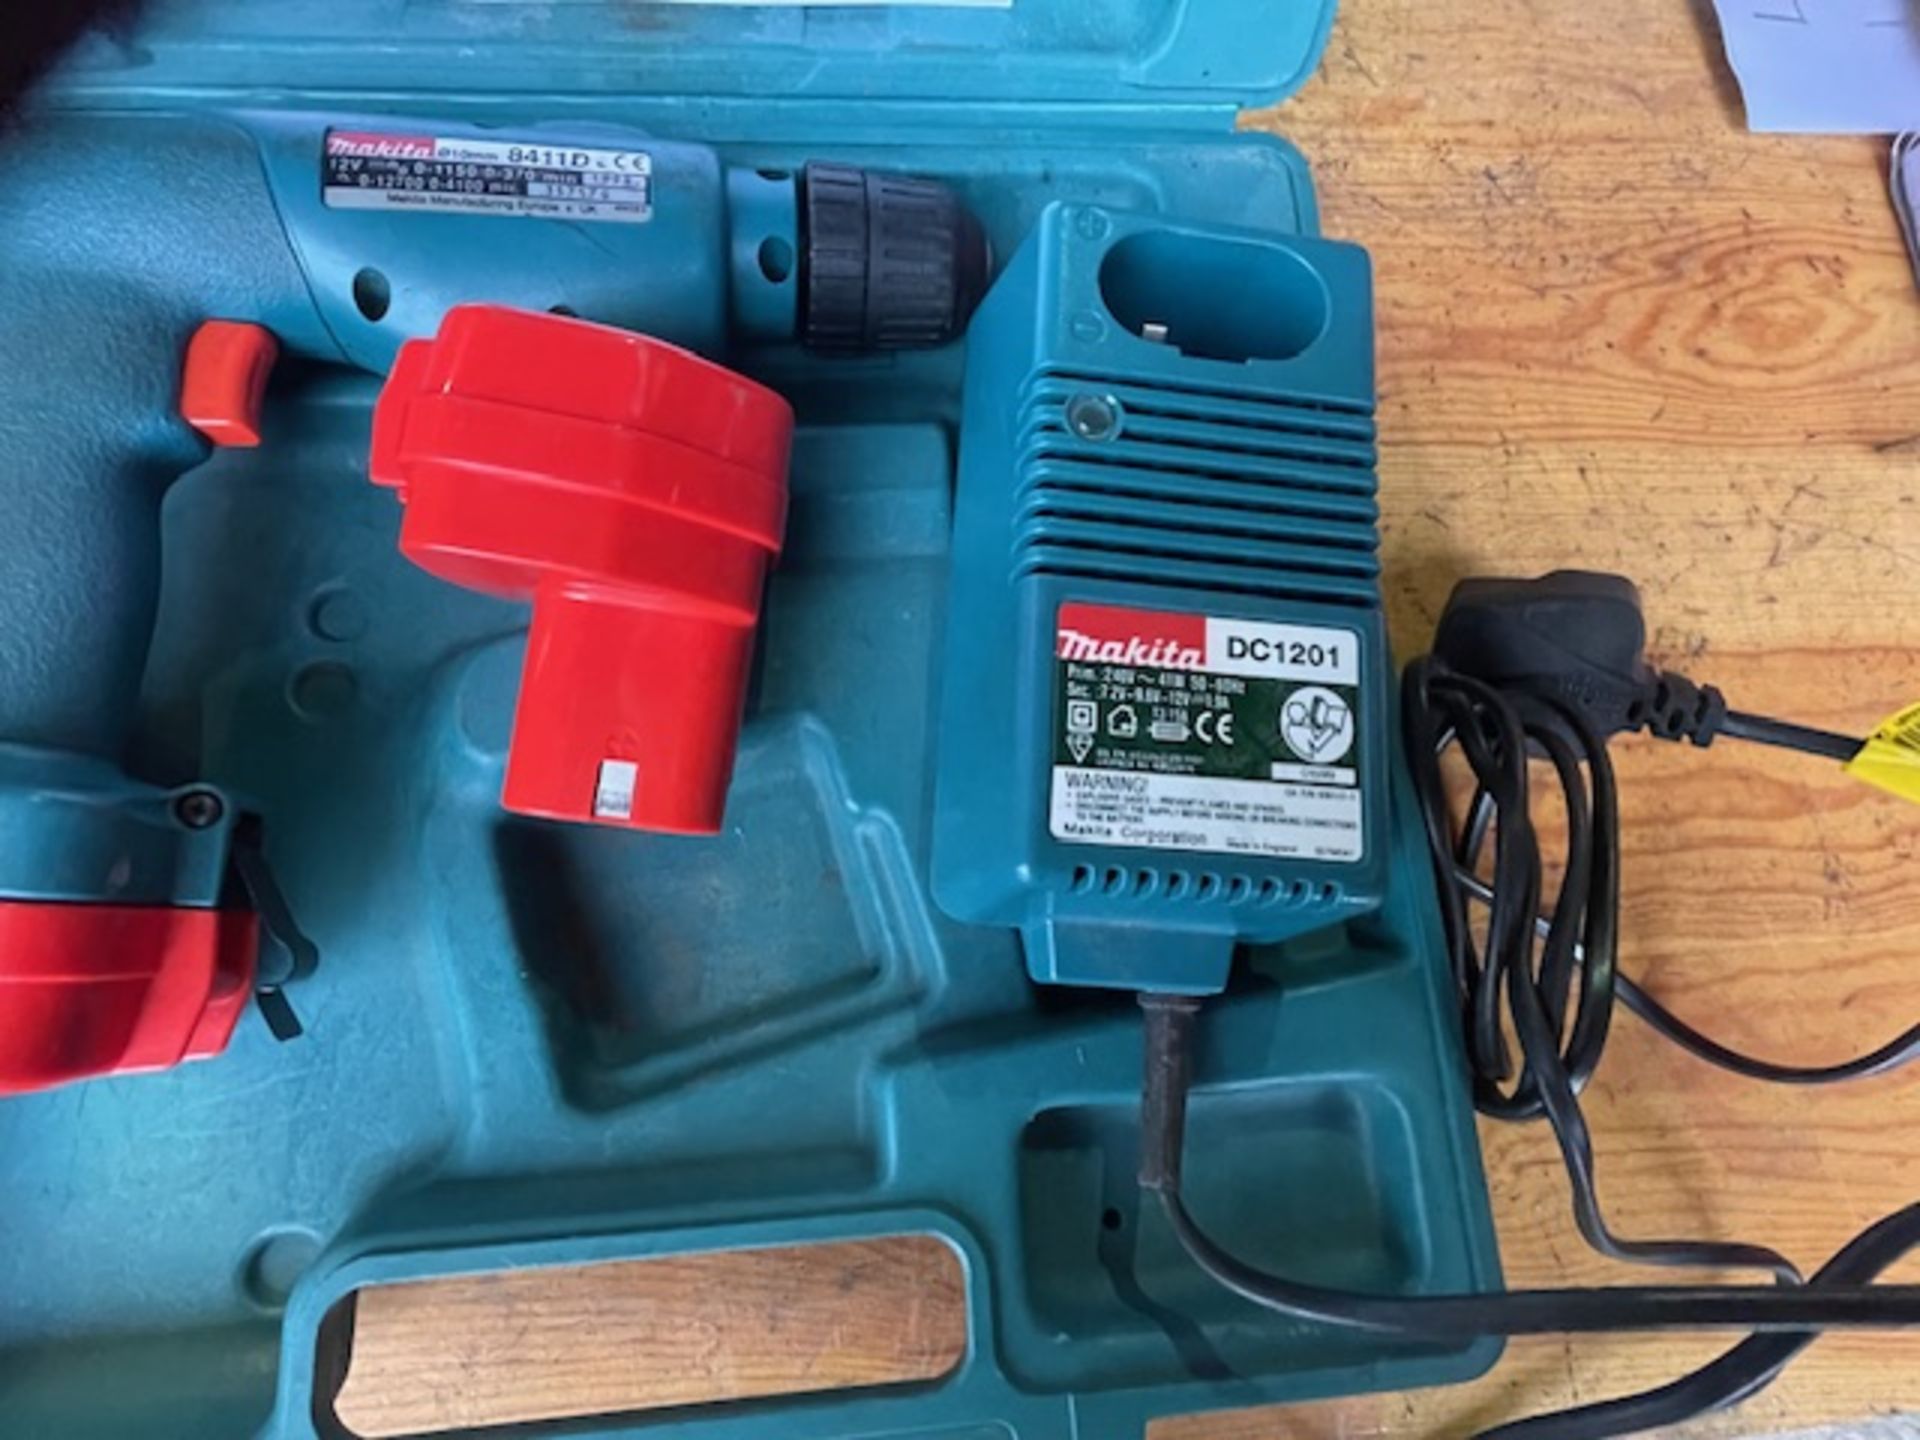 MAKITA 8411D CORDLESS DRILL C/W CHARGER AND BATTERIES IN CASE - Image 2 of 4